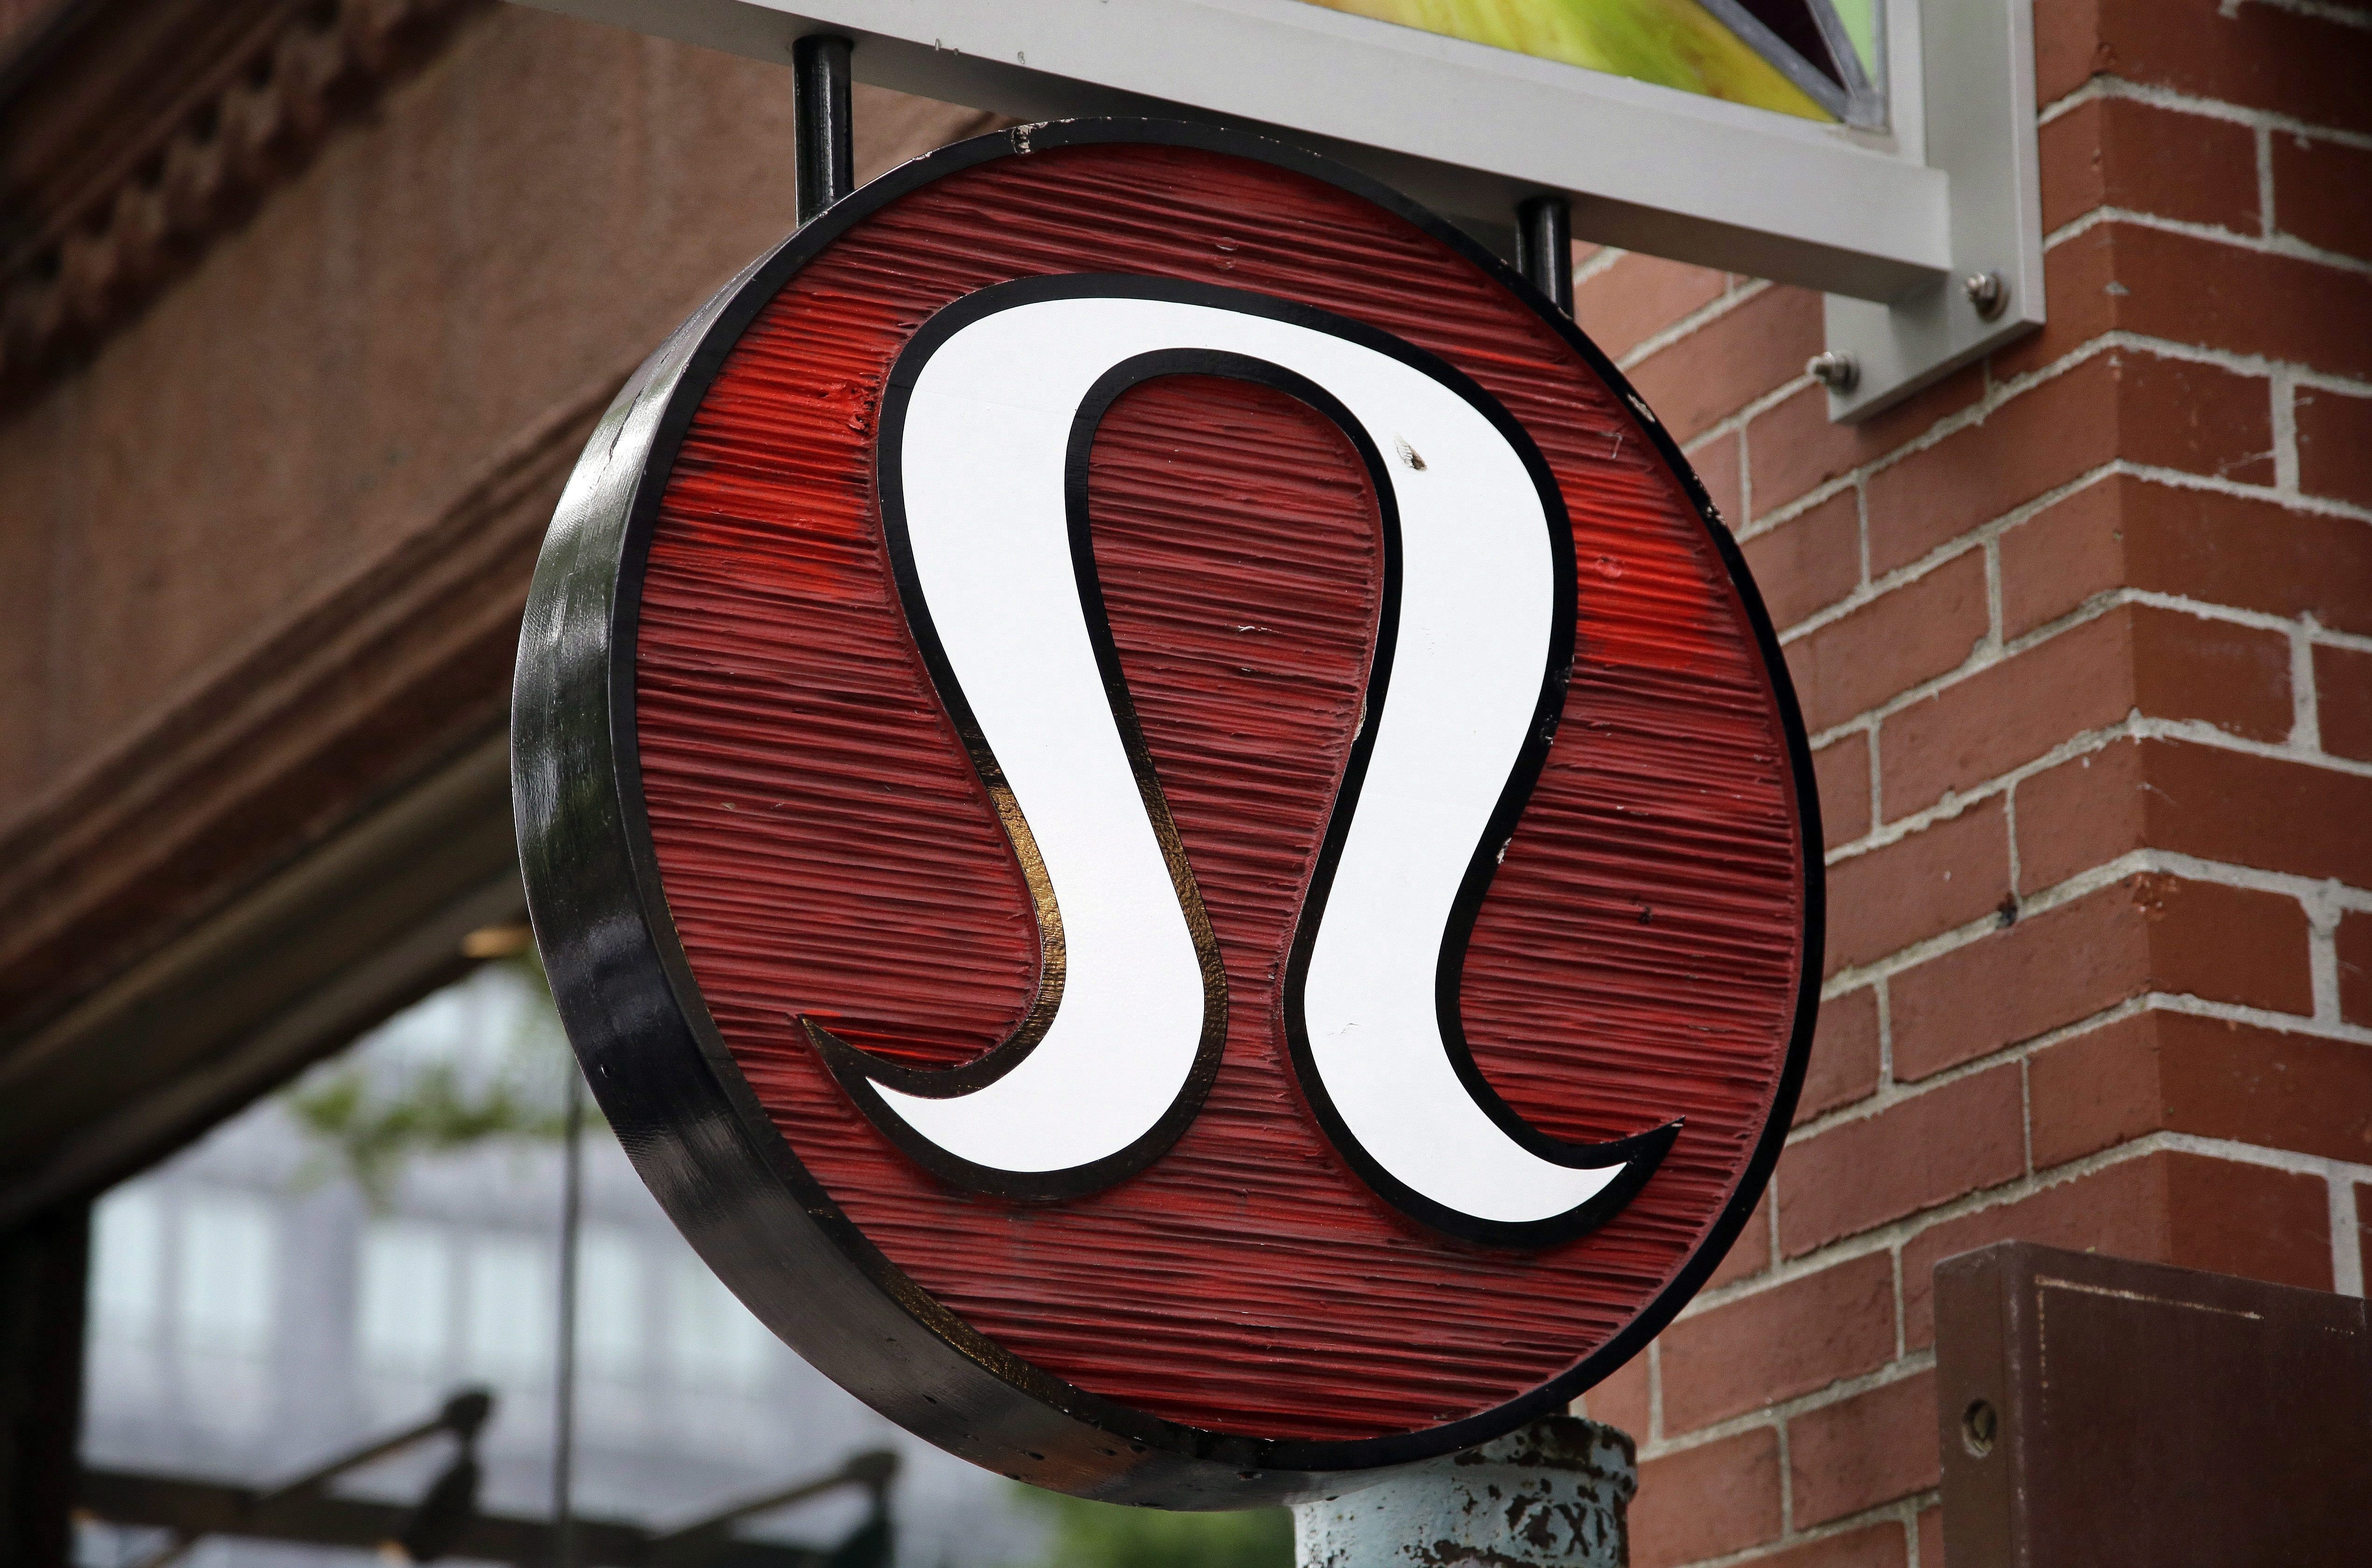 Why Lululemon Stock Has Gained 59% in 2018